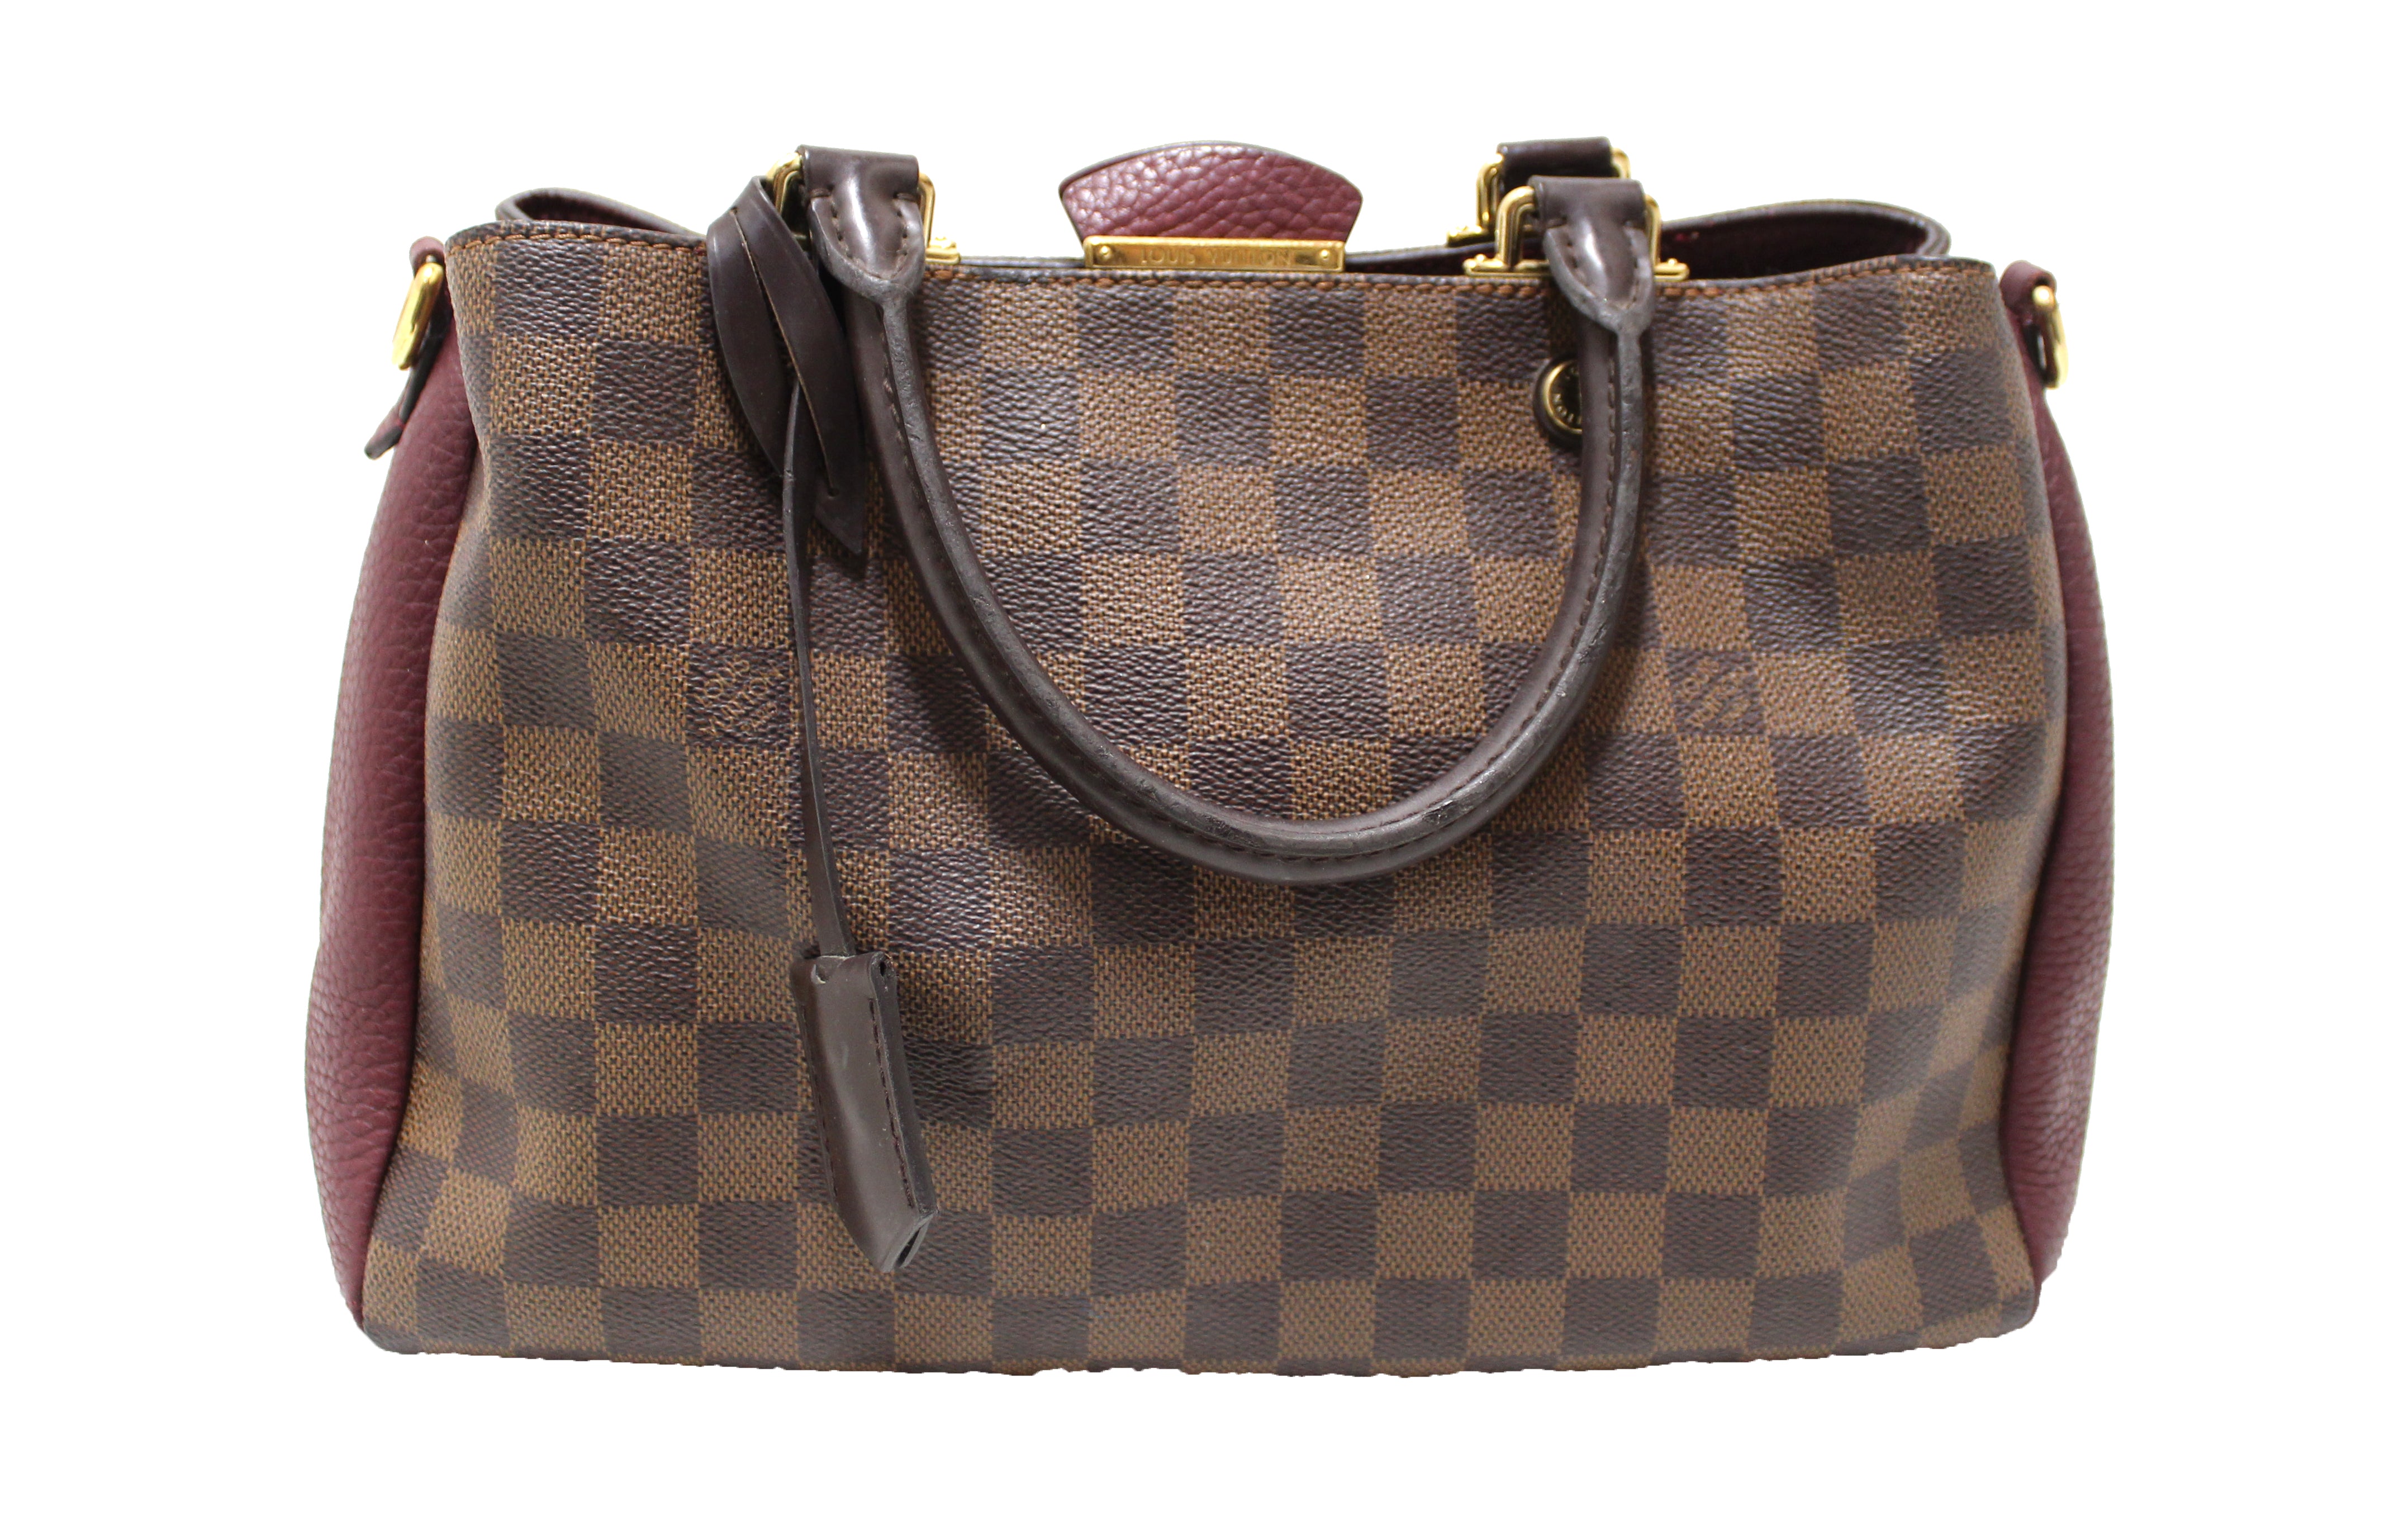 Louis Vuitton Brittany Damier Ebene Leather Tote Bag